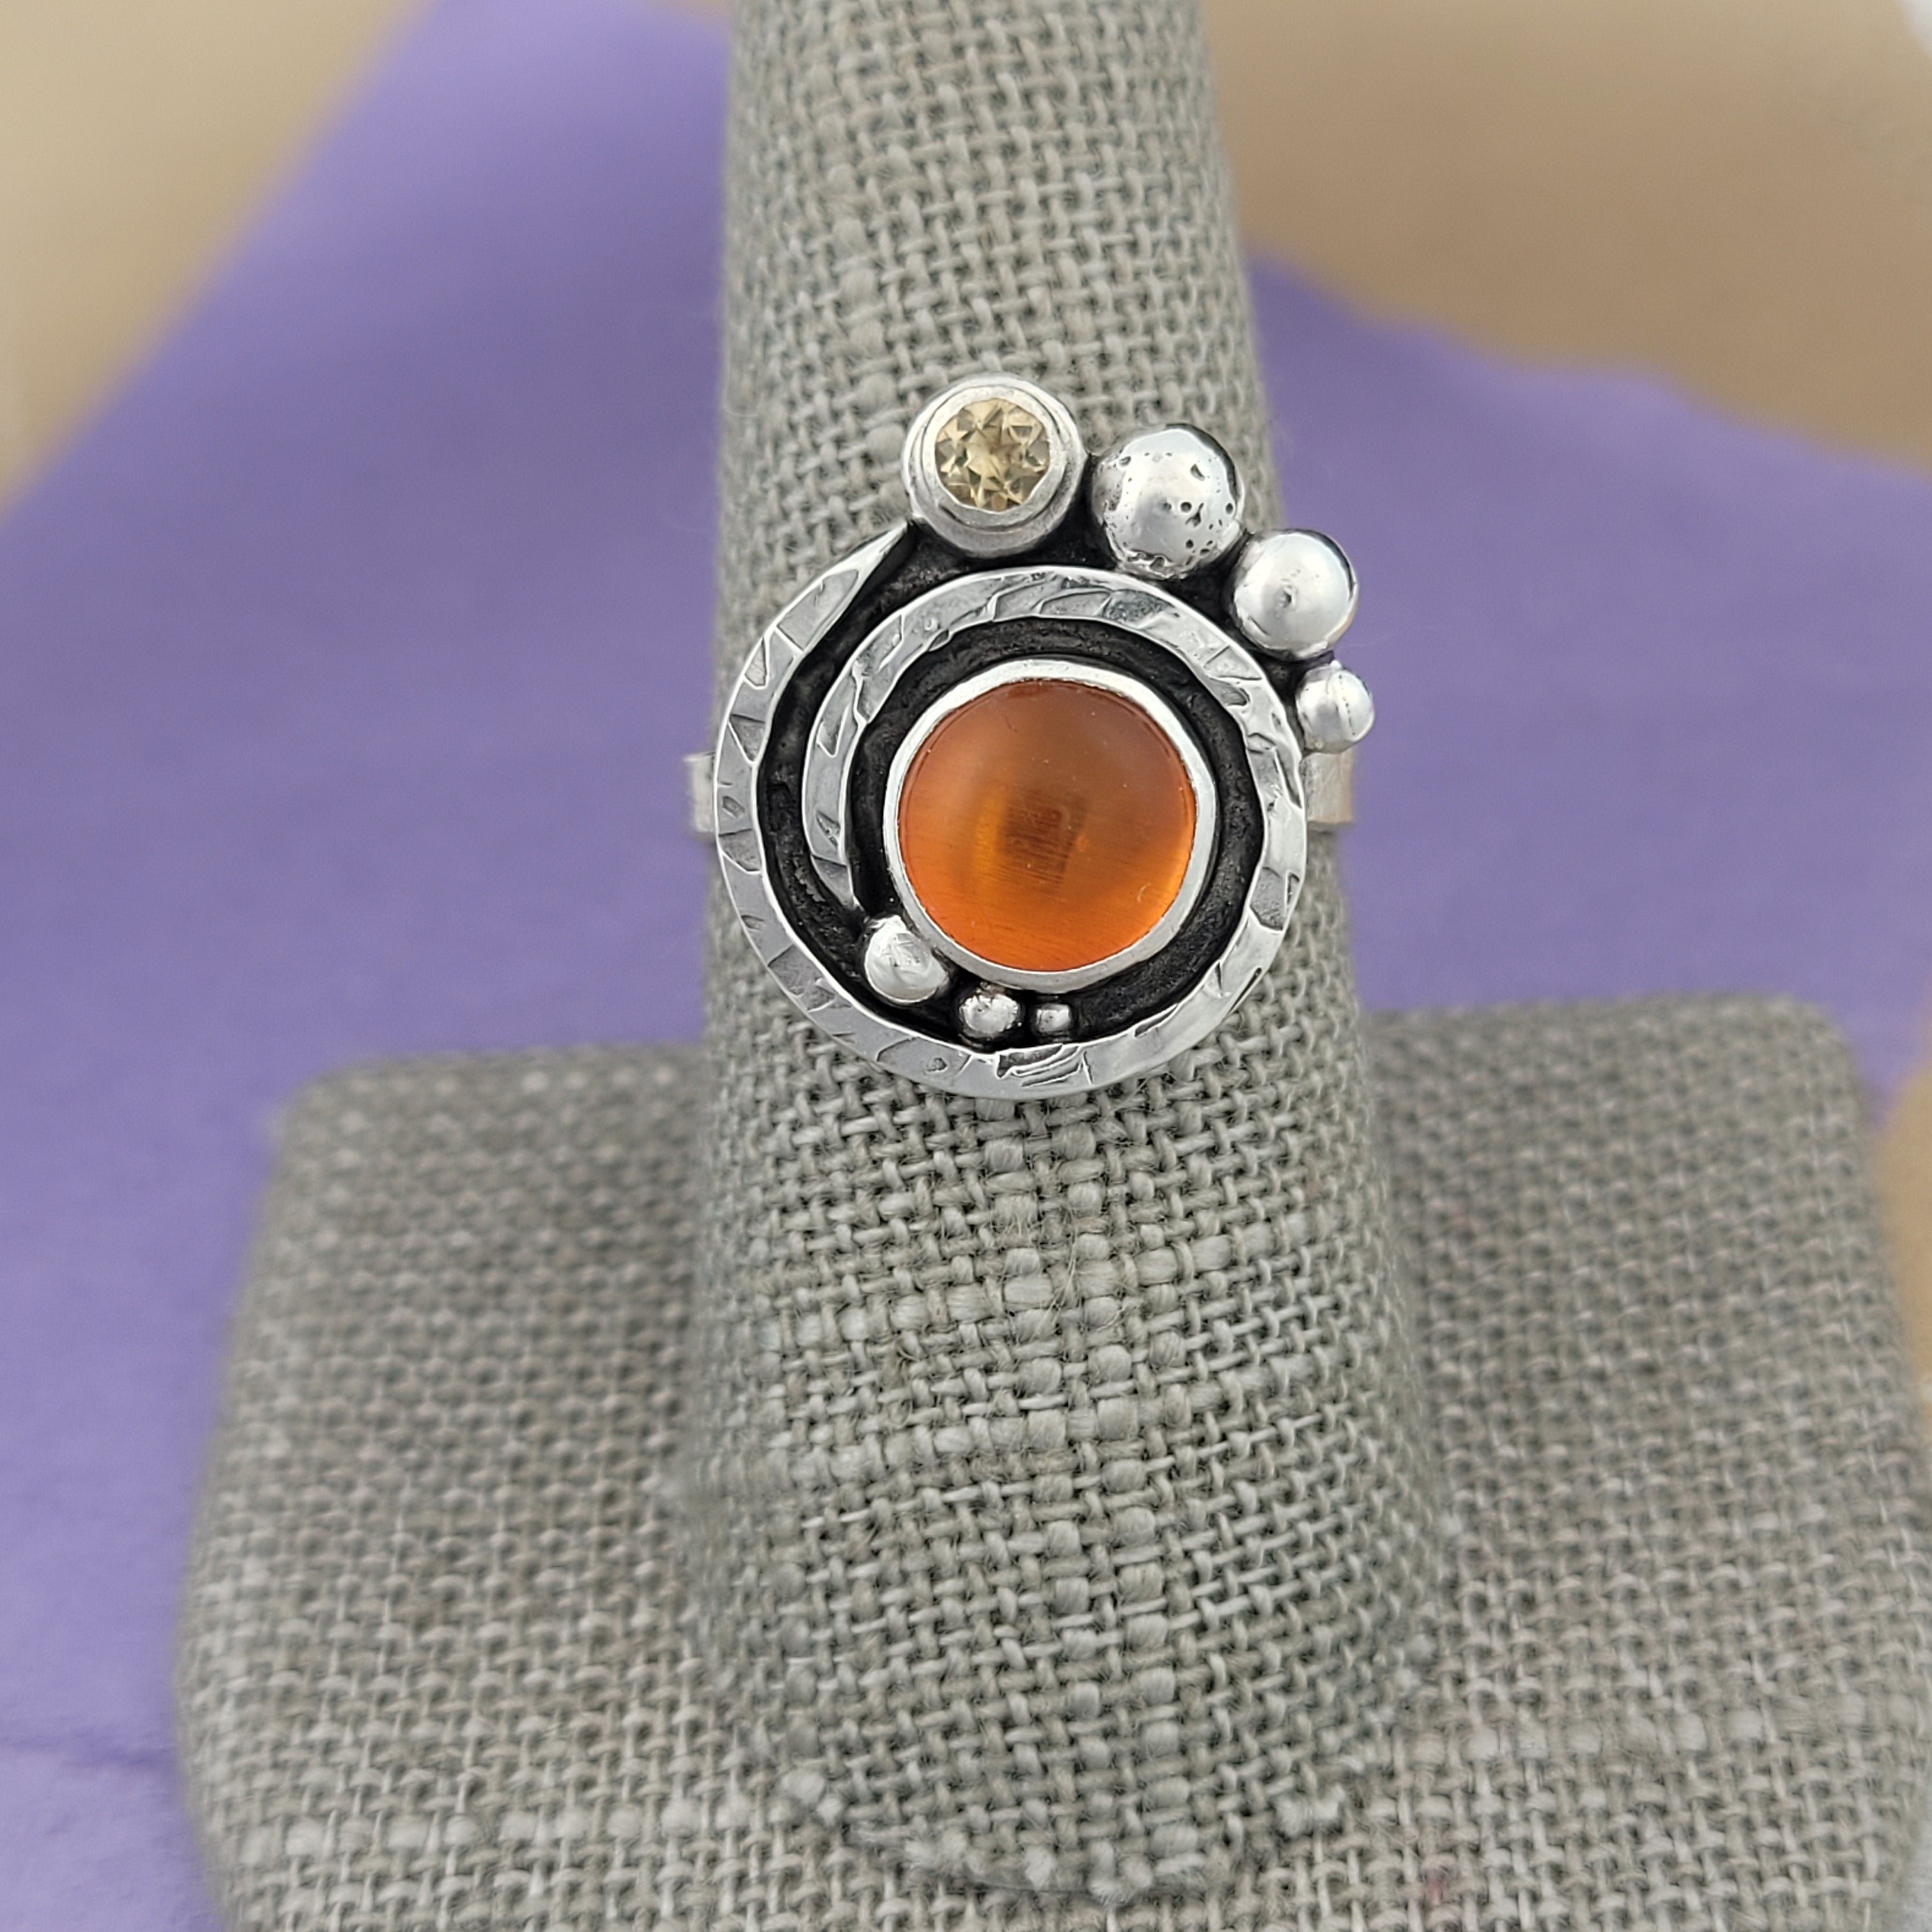 Size 8, Amber and Golden Citrine Sterling Silver Ring